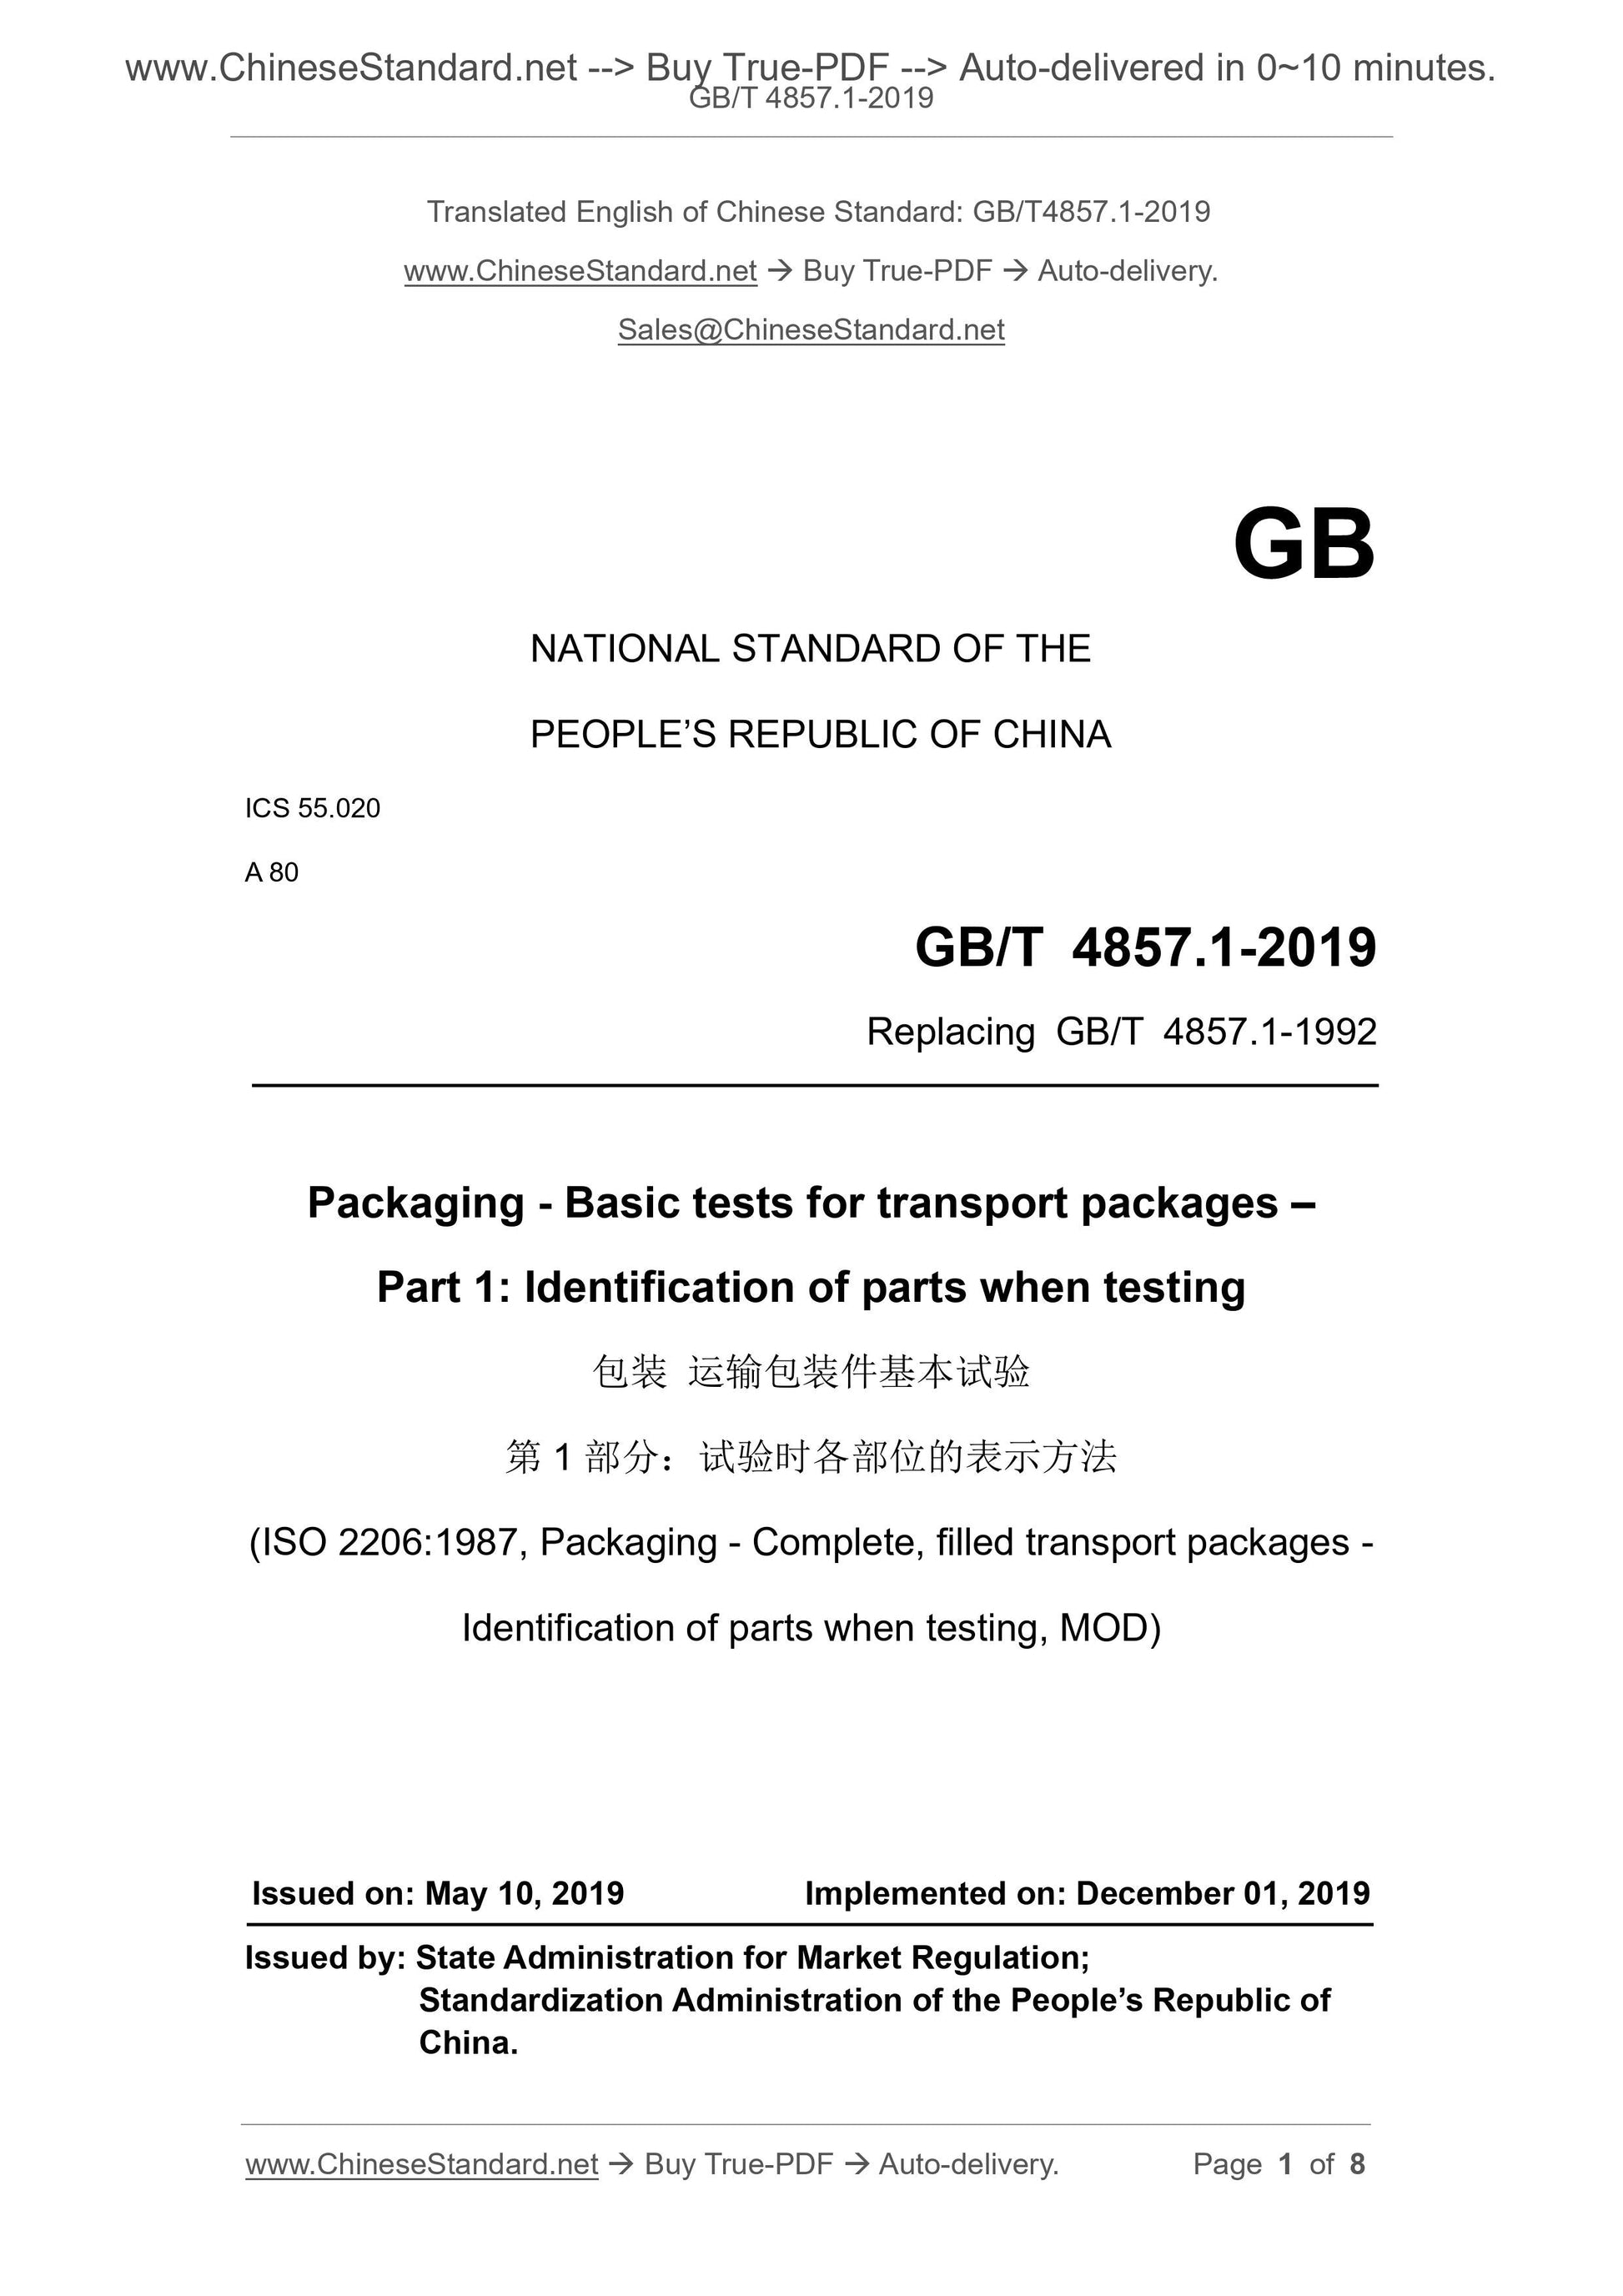 GB/T 4857.1-2019 Page 1